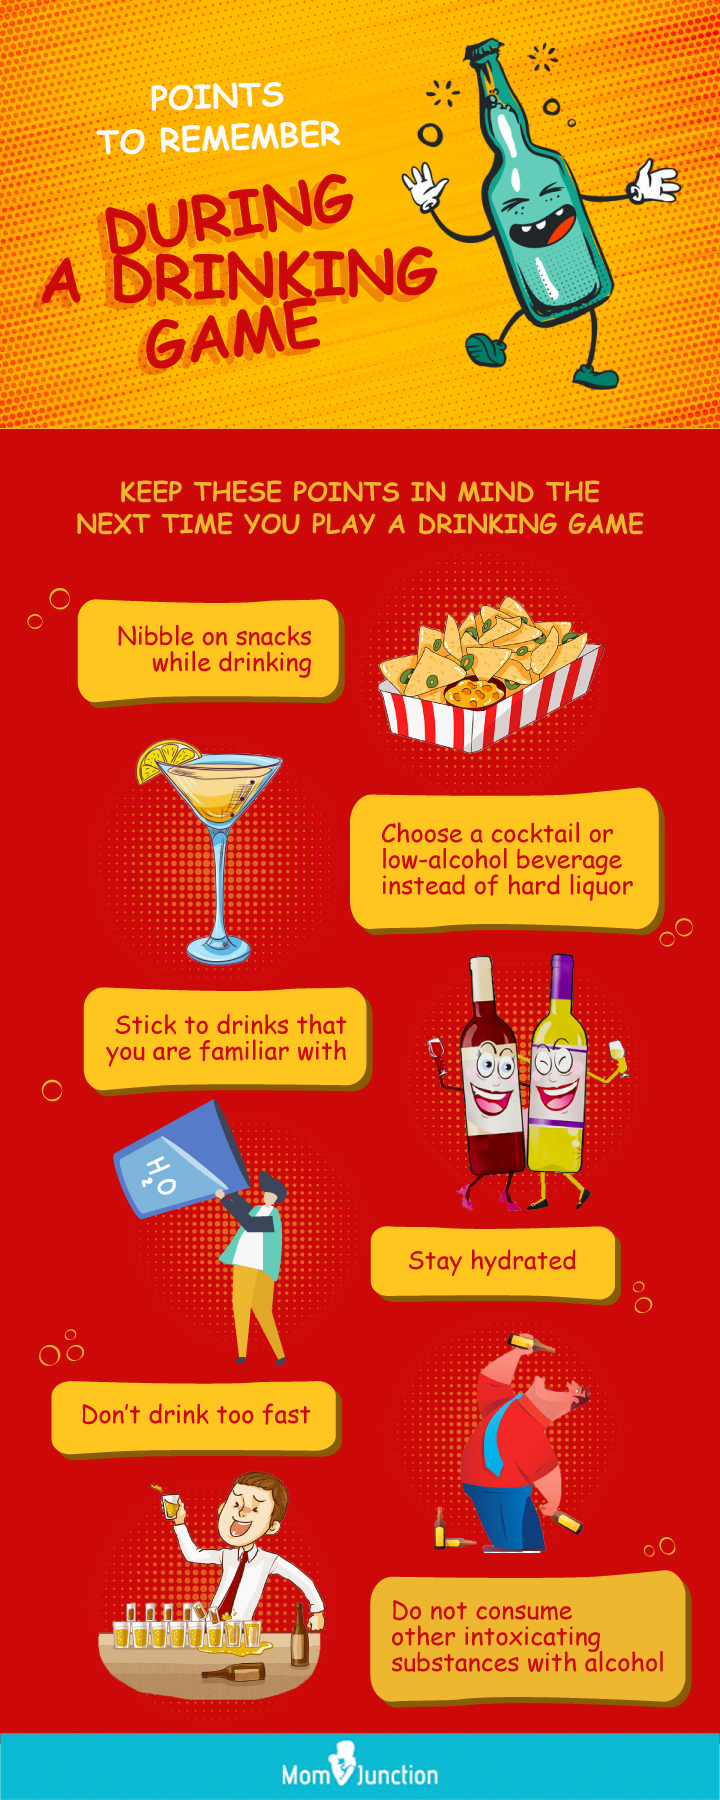 online drinking games for couples and friends to play (infographic)